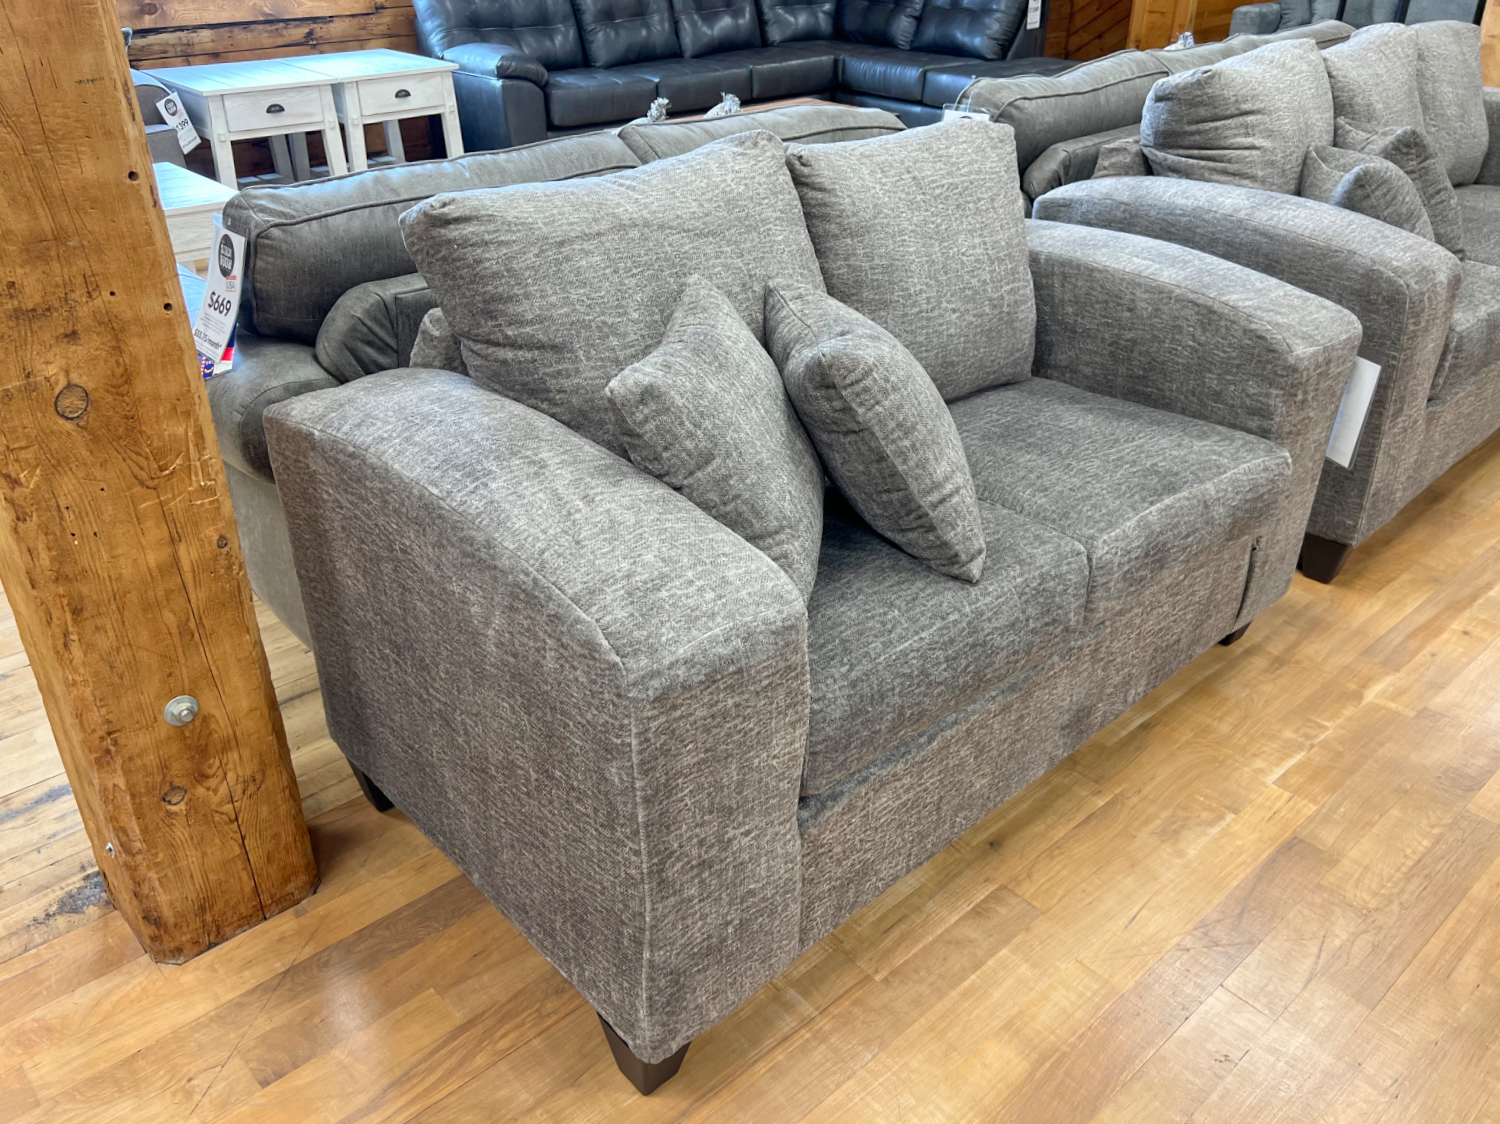 plush loveseat with wide arms in a cozy taupe fabric in the stock room discount furniture warehouse in rockford, il